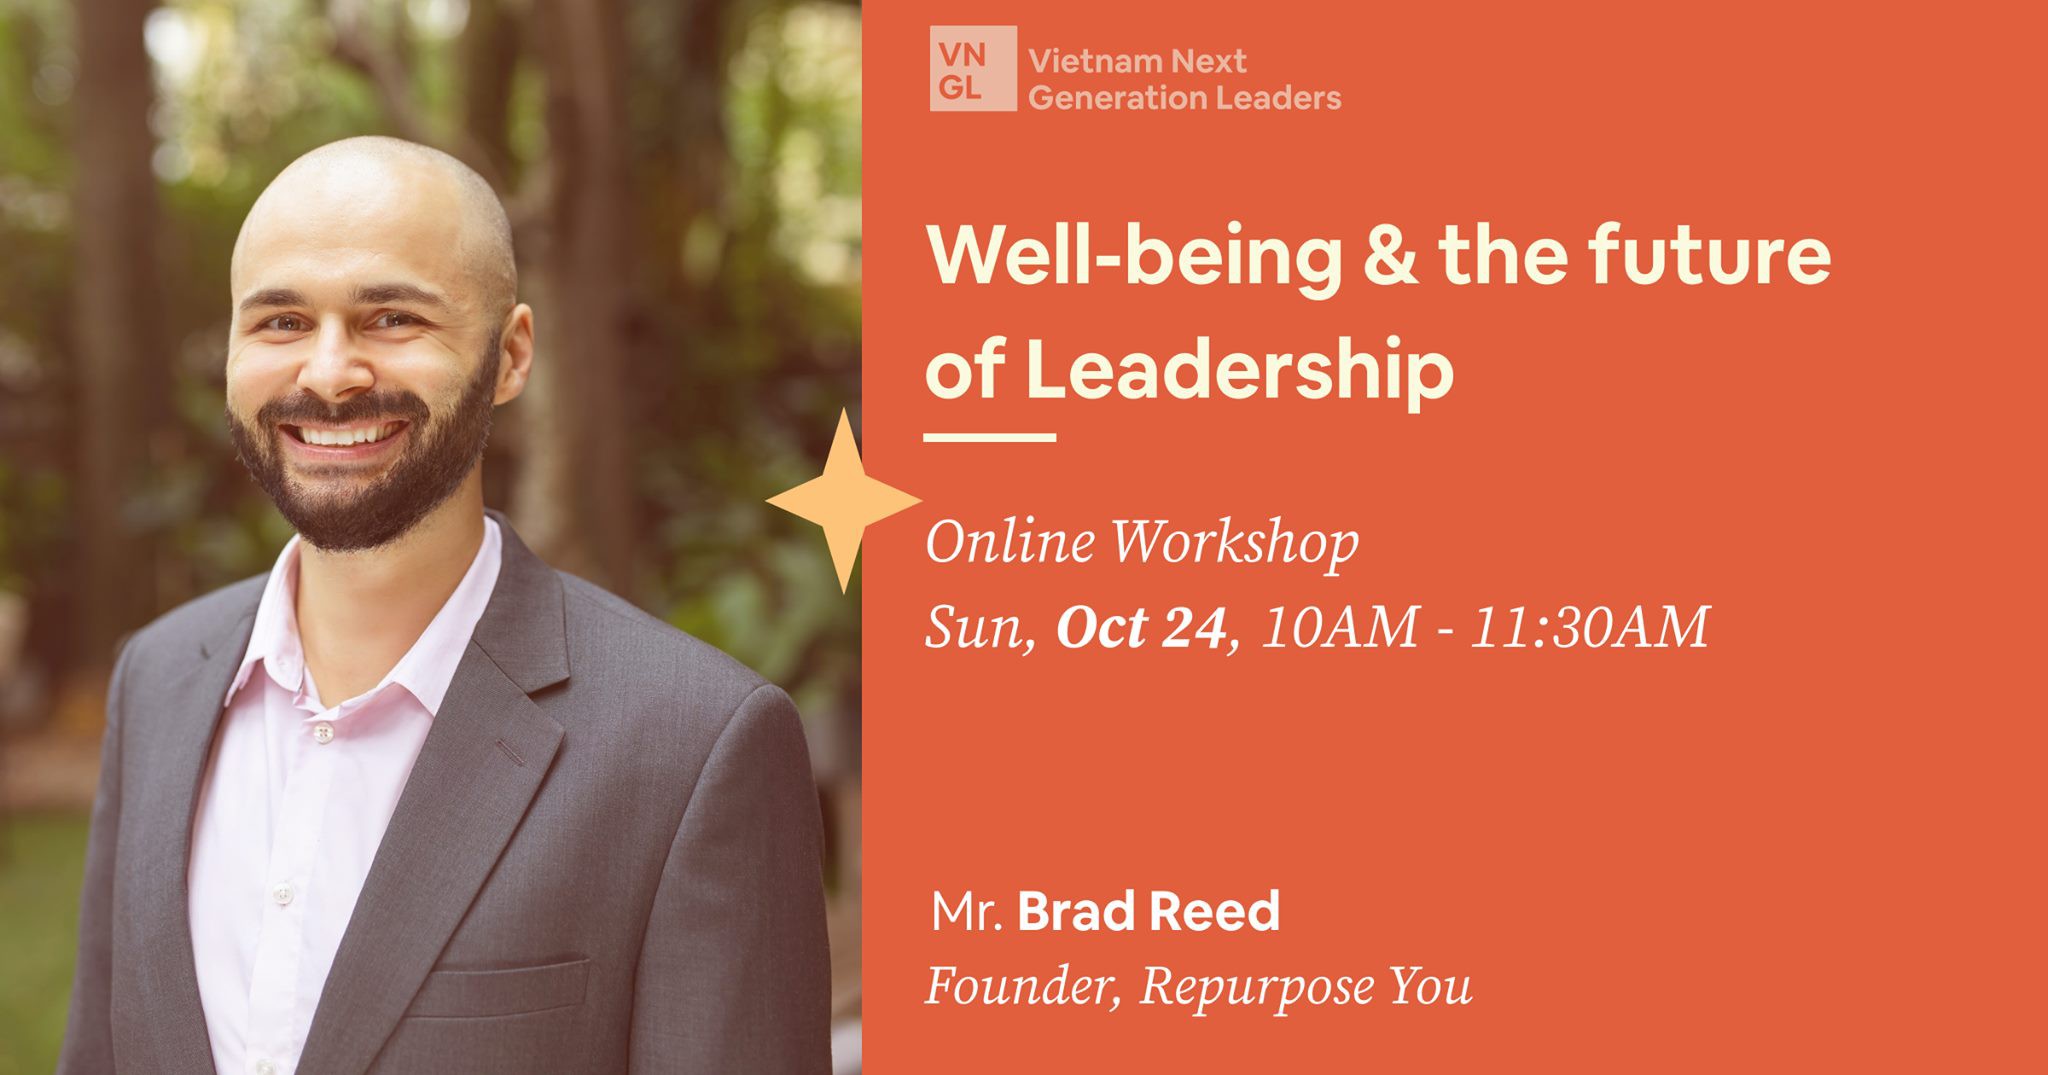 Online Workshop Well-being and The Future of Leadership